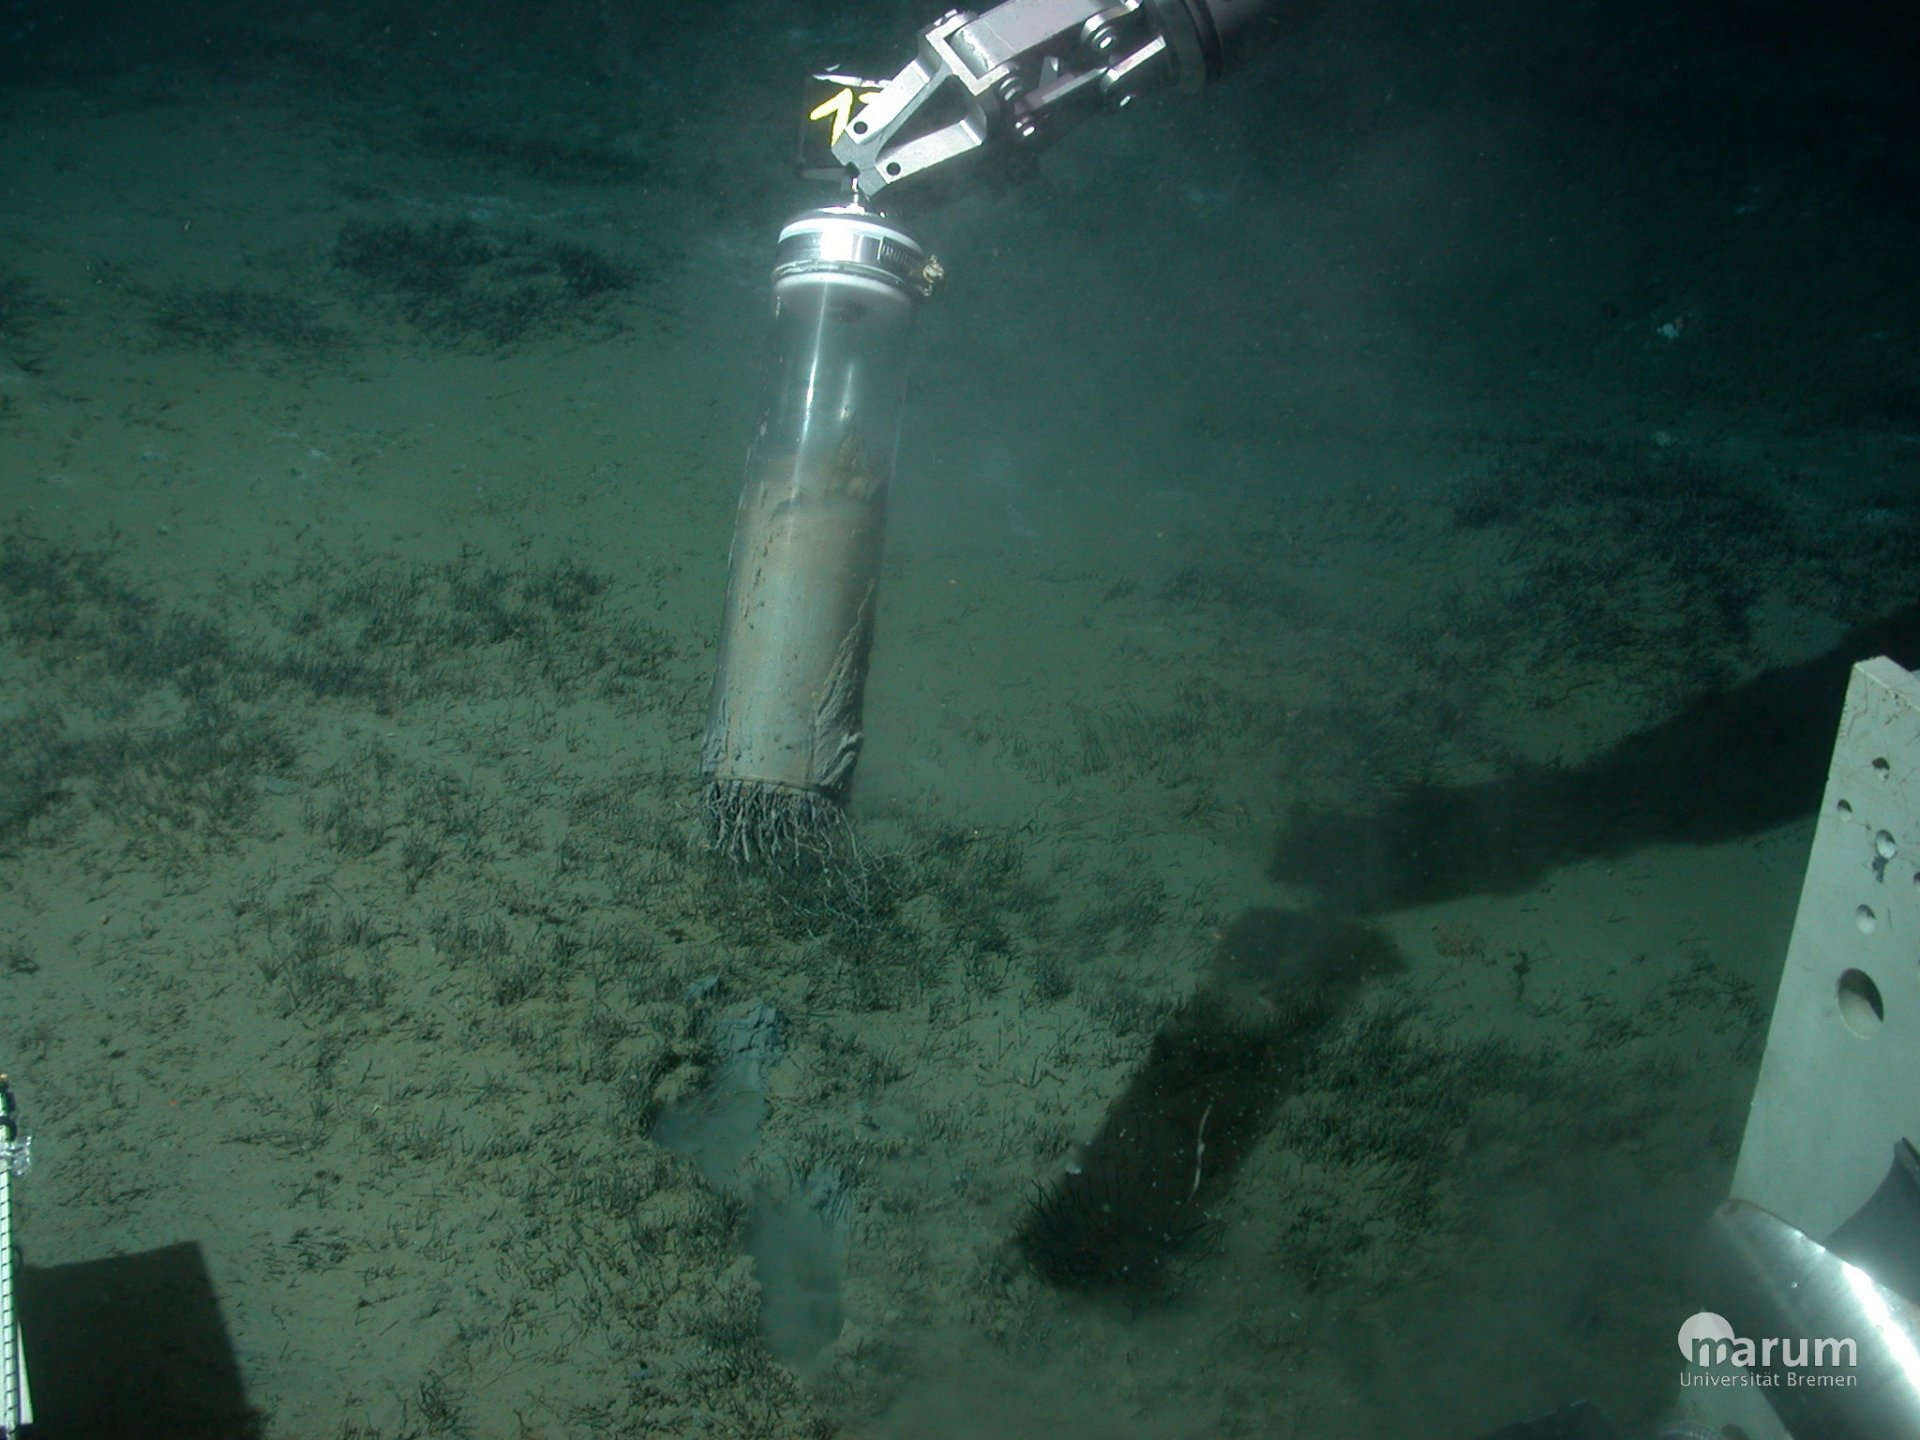 The submersible takes samples in the mud around Håkon Mosby mud volcano. With this tube so-called sediment cores can be taken, which allow an insight into the community of organisms on the surface and deeper in the sediment. (© MARUM – Centre for Marine Environmental Sciences, University of Bremen)